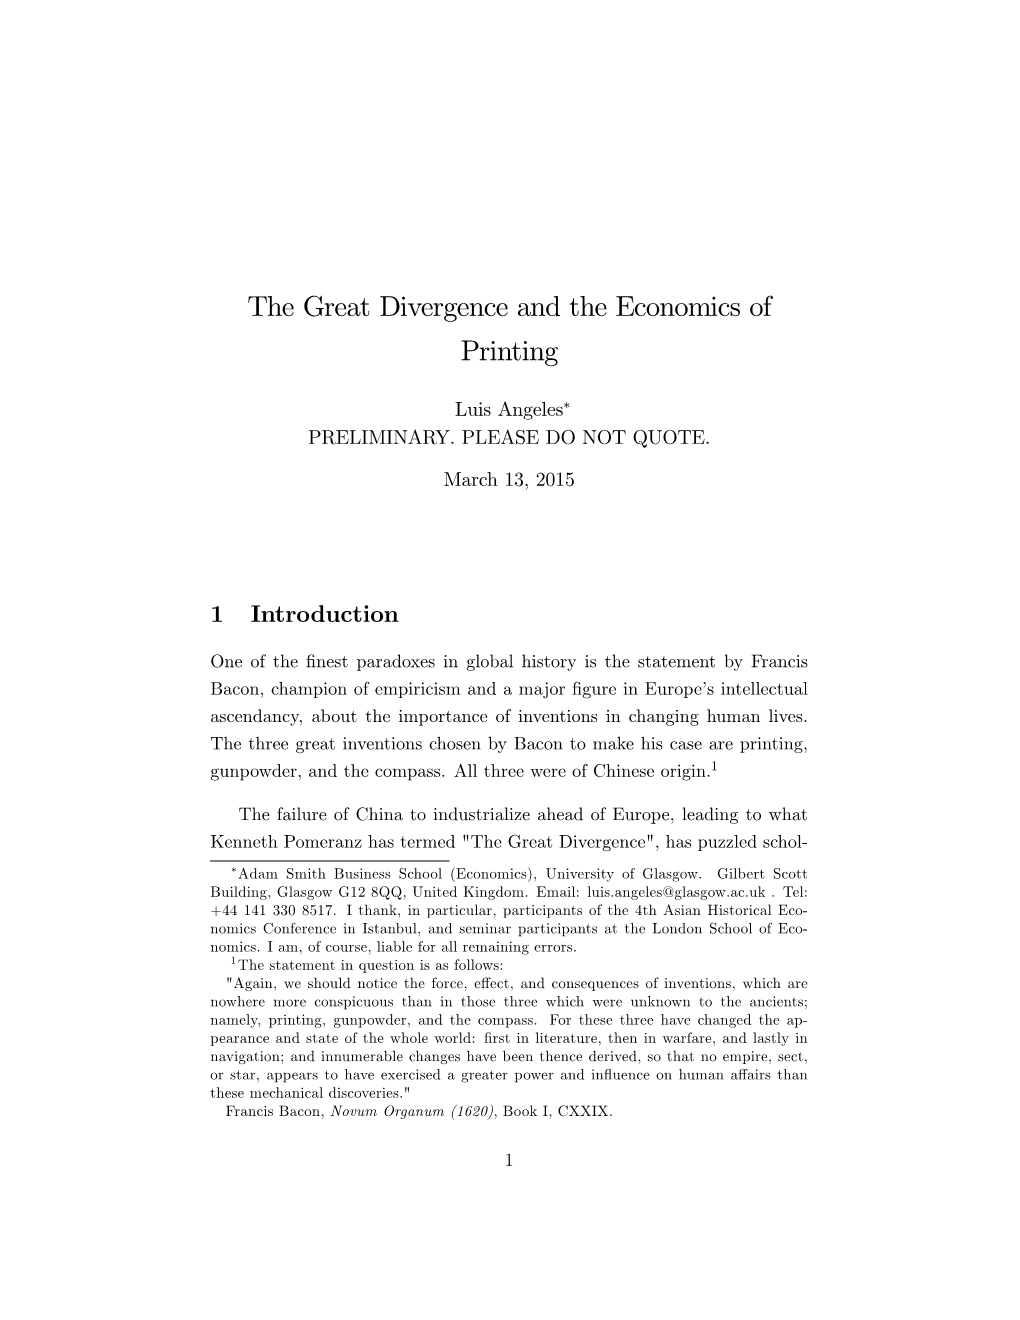 The Great Divergence and the Economics of Printing